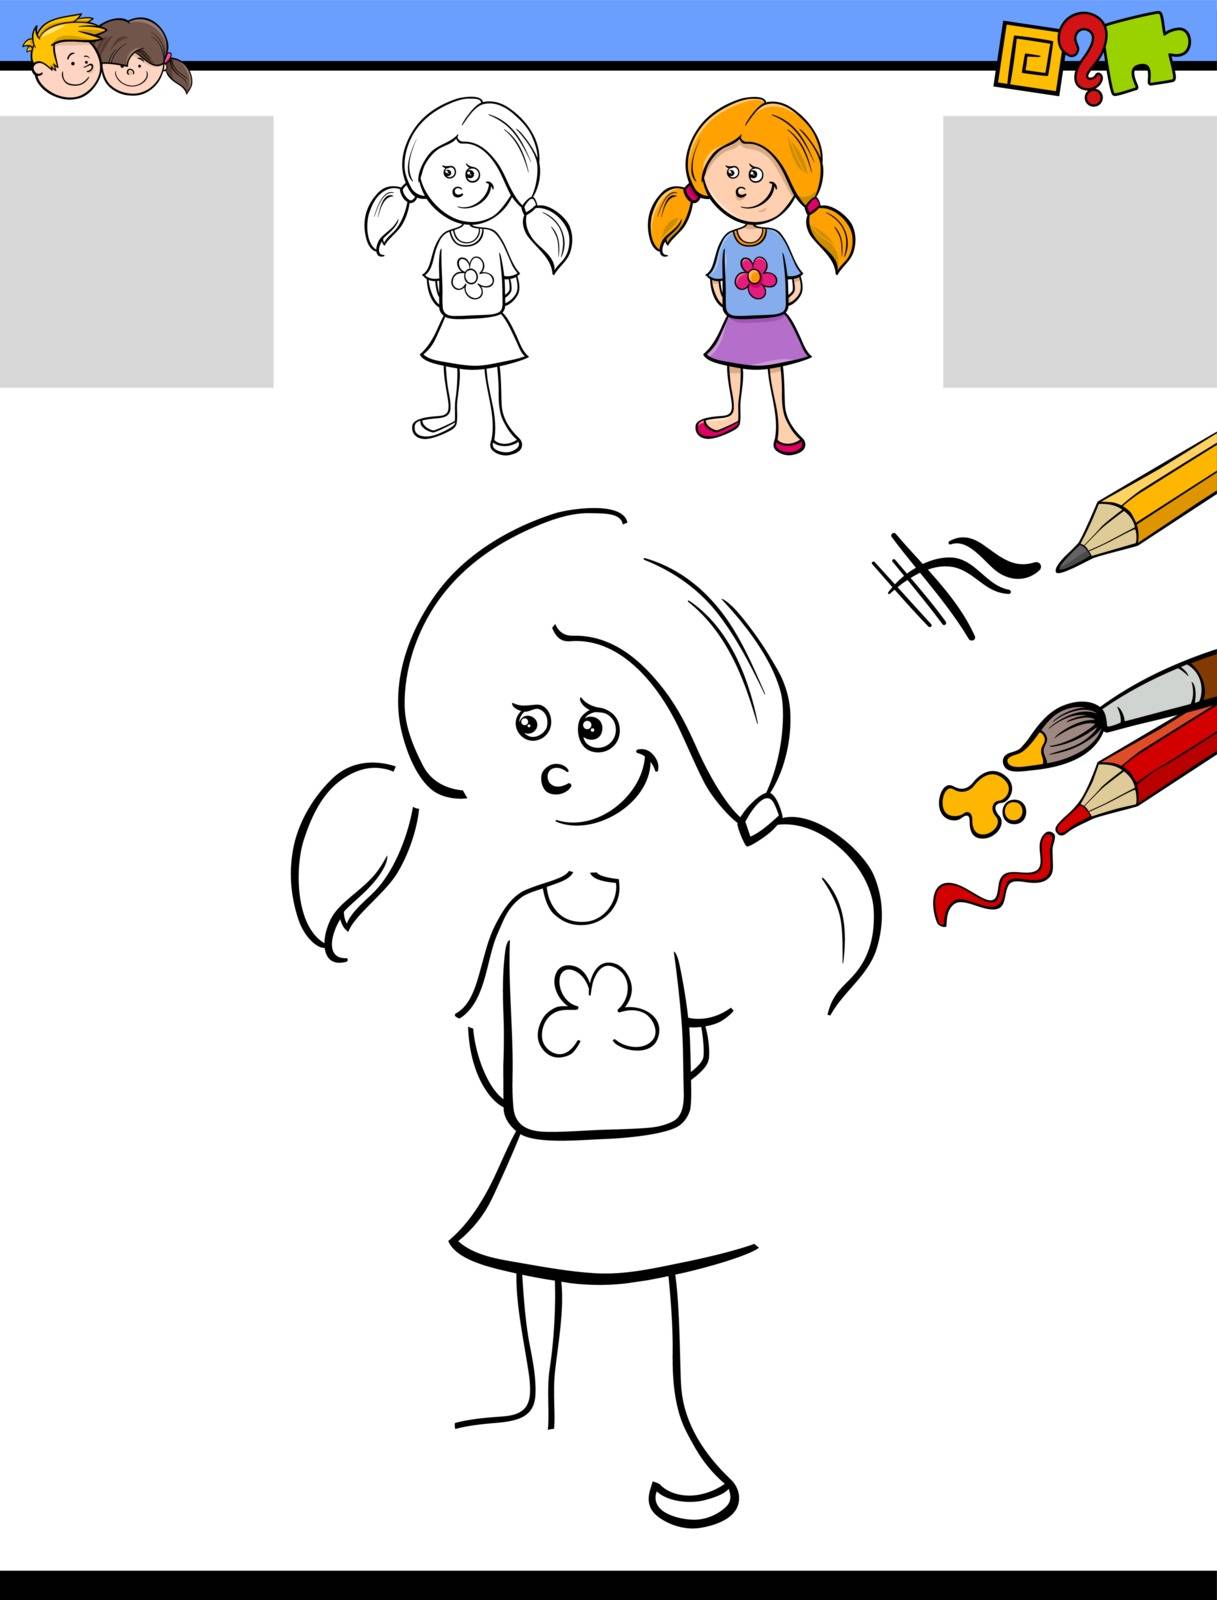 Cartoon Illustration of Drawing and Coloring Educational Activity for Preschool Children with Cute Girl Character